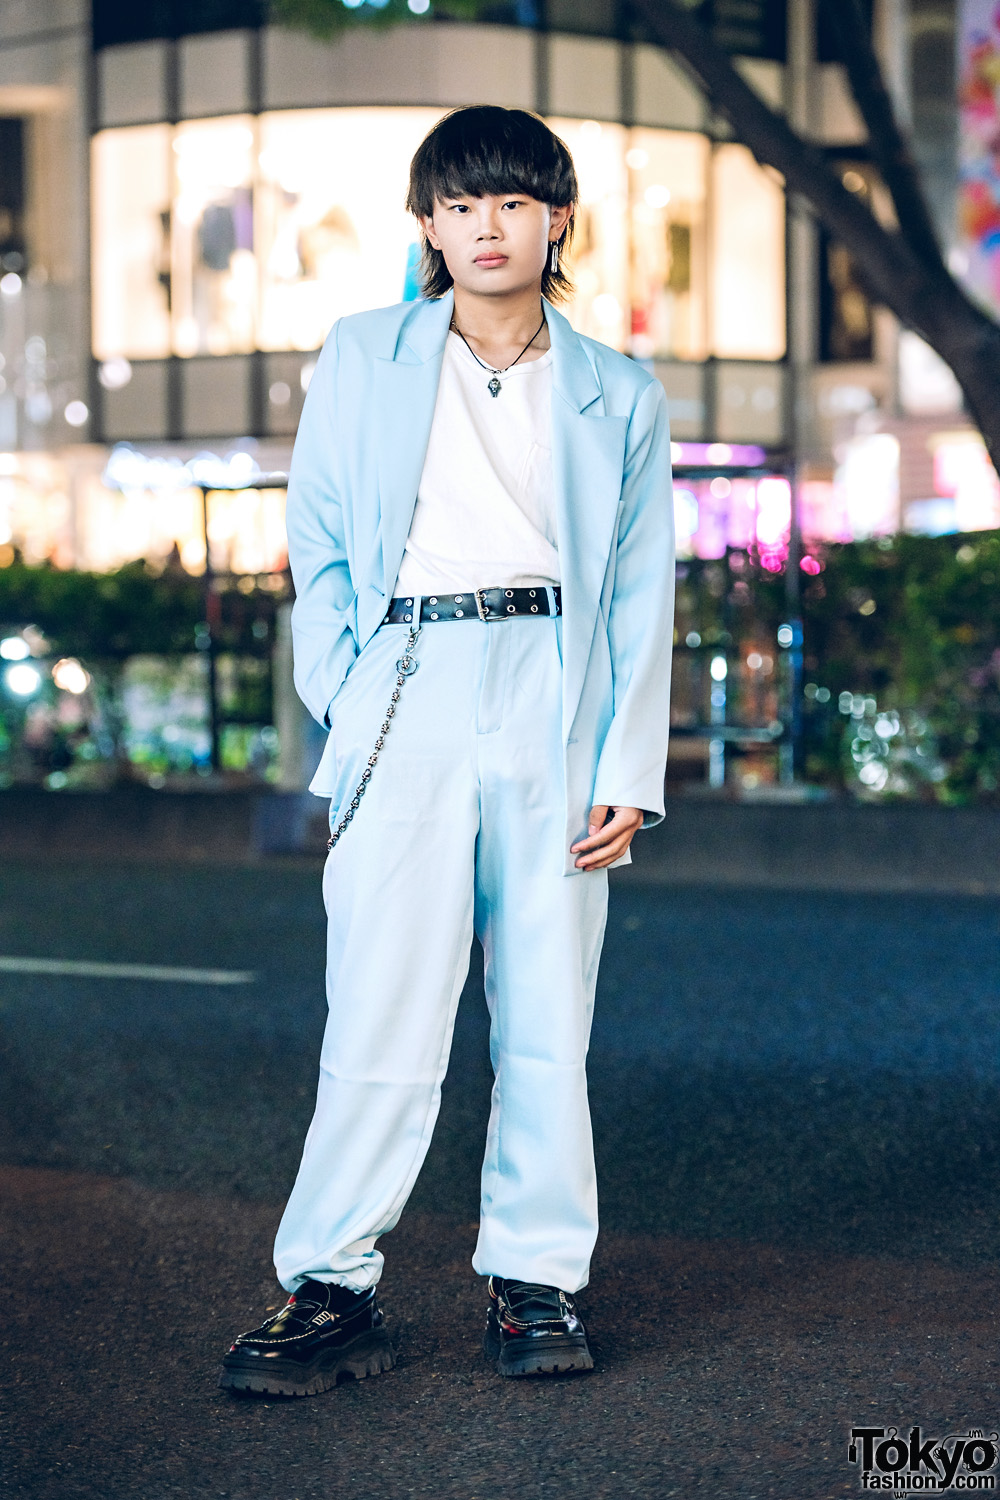 Faith Tokyo Blue Suit Menswear Style w/ Vintage Top, Eytys Shoes & Oh Pearl Accessories